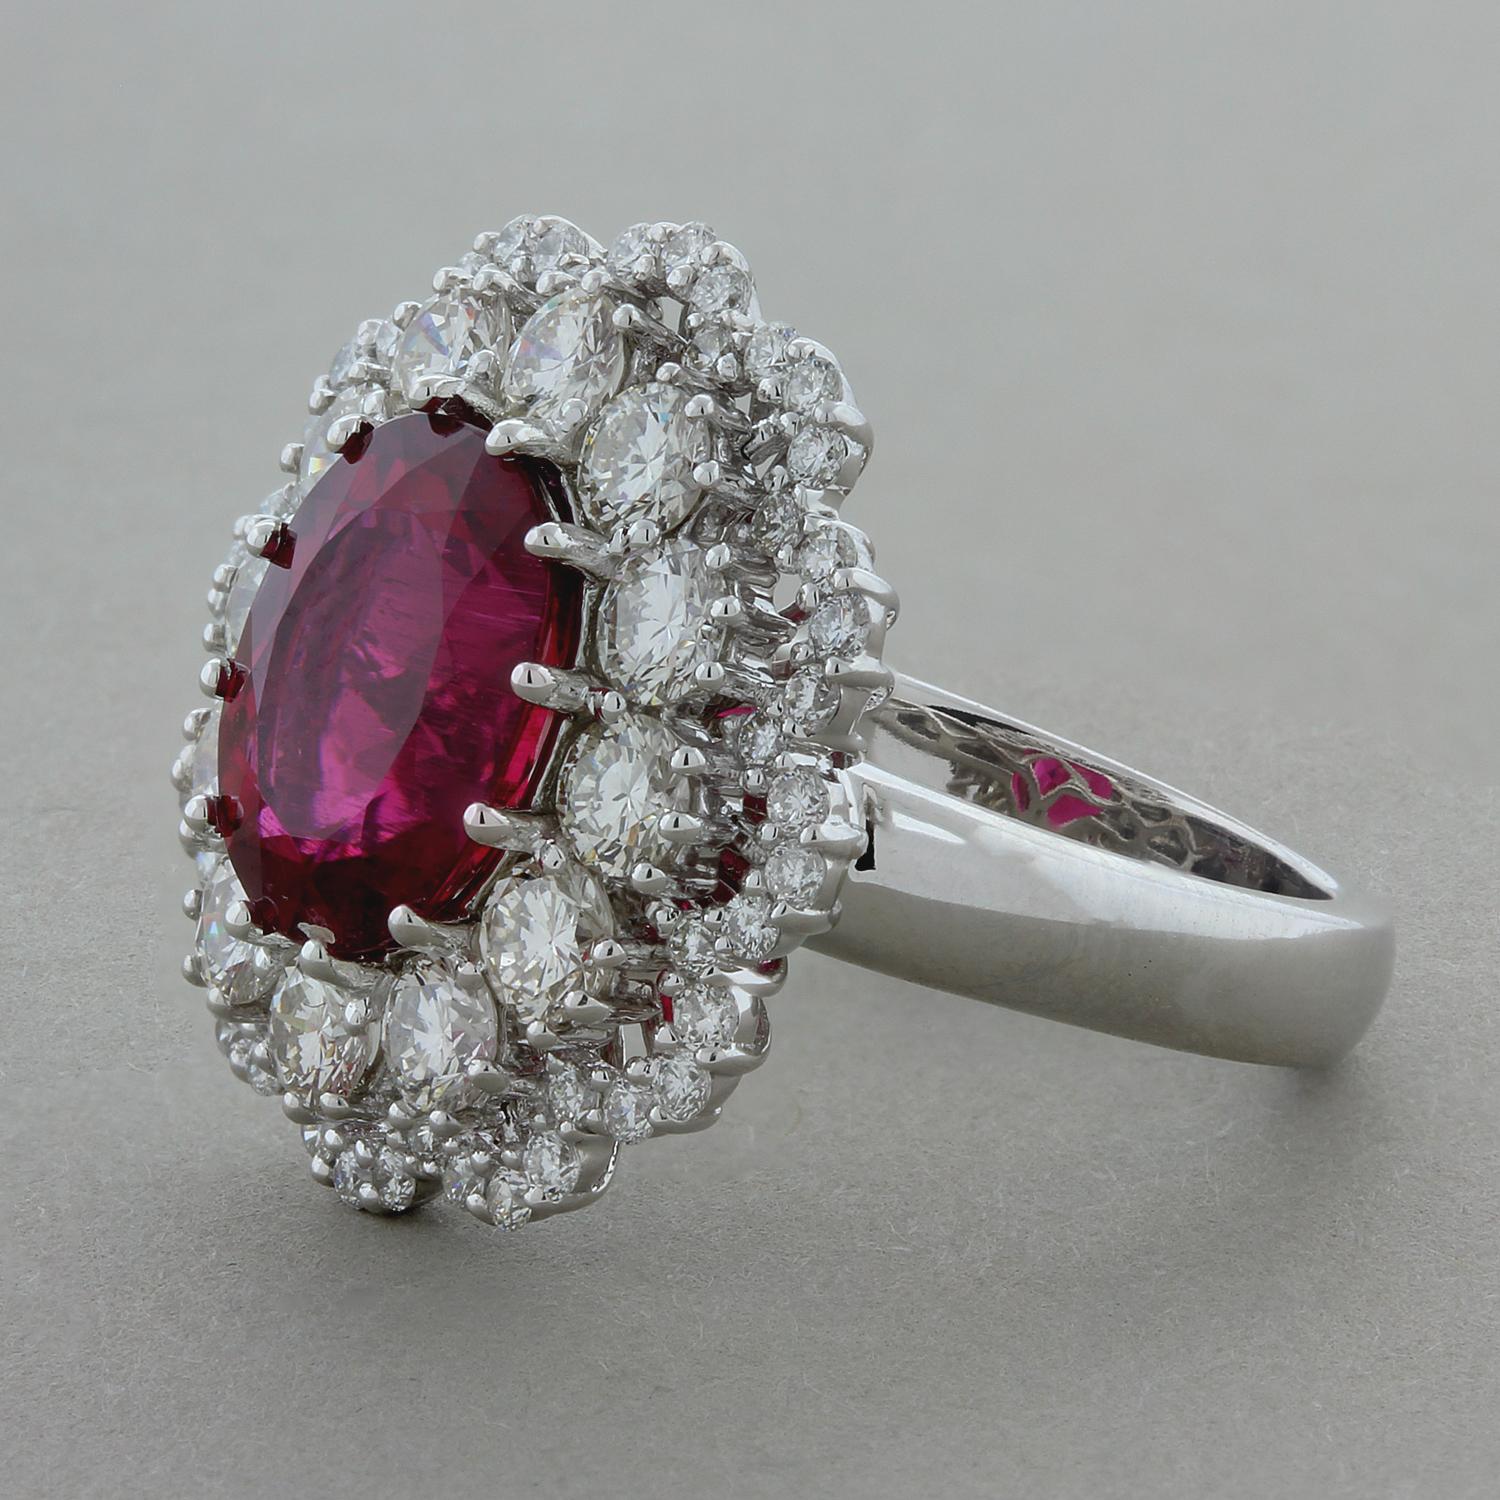 This lovely ring features a deep royal red rubelite tourmaline weighting 5.82 carats. It is accented by a double halo of 1.62 carats of round brilliant cut diamonds. Set in a 14K gold clustered flower setting.

Ring Size 7 (Sizable)
